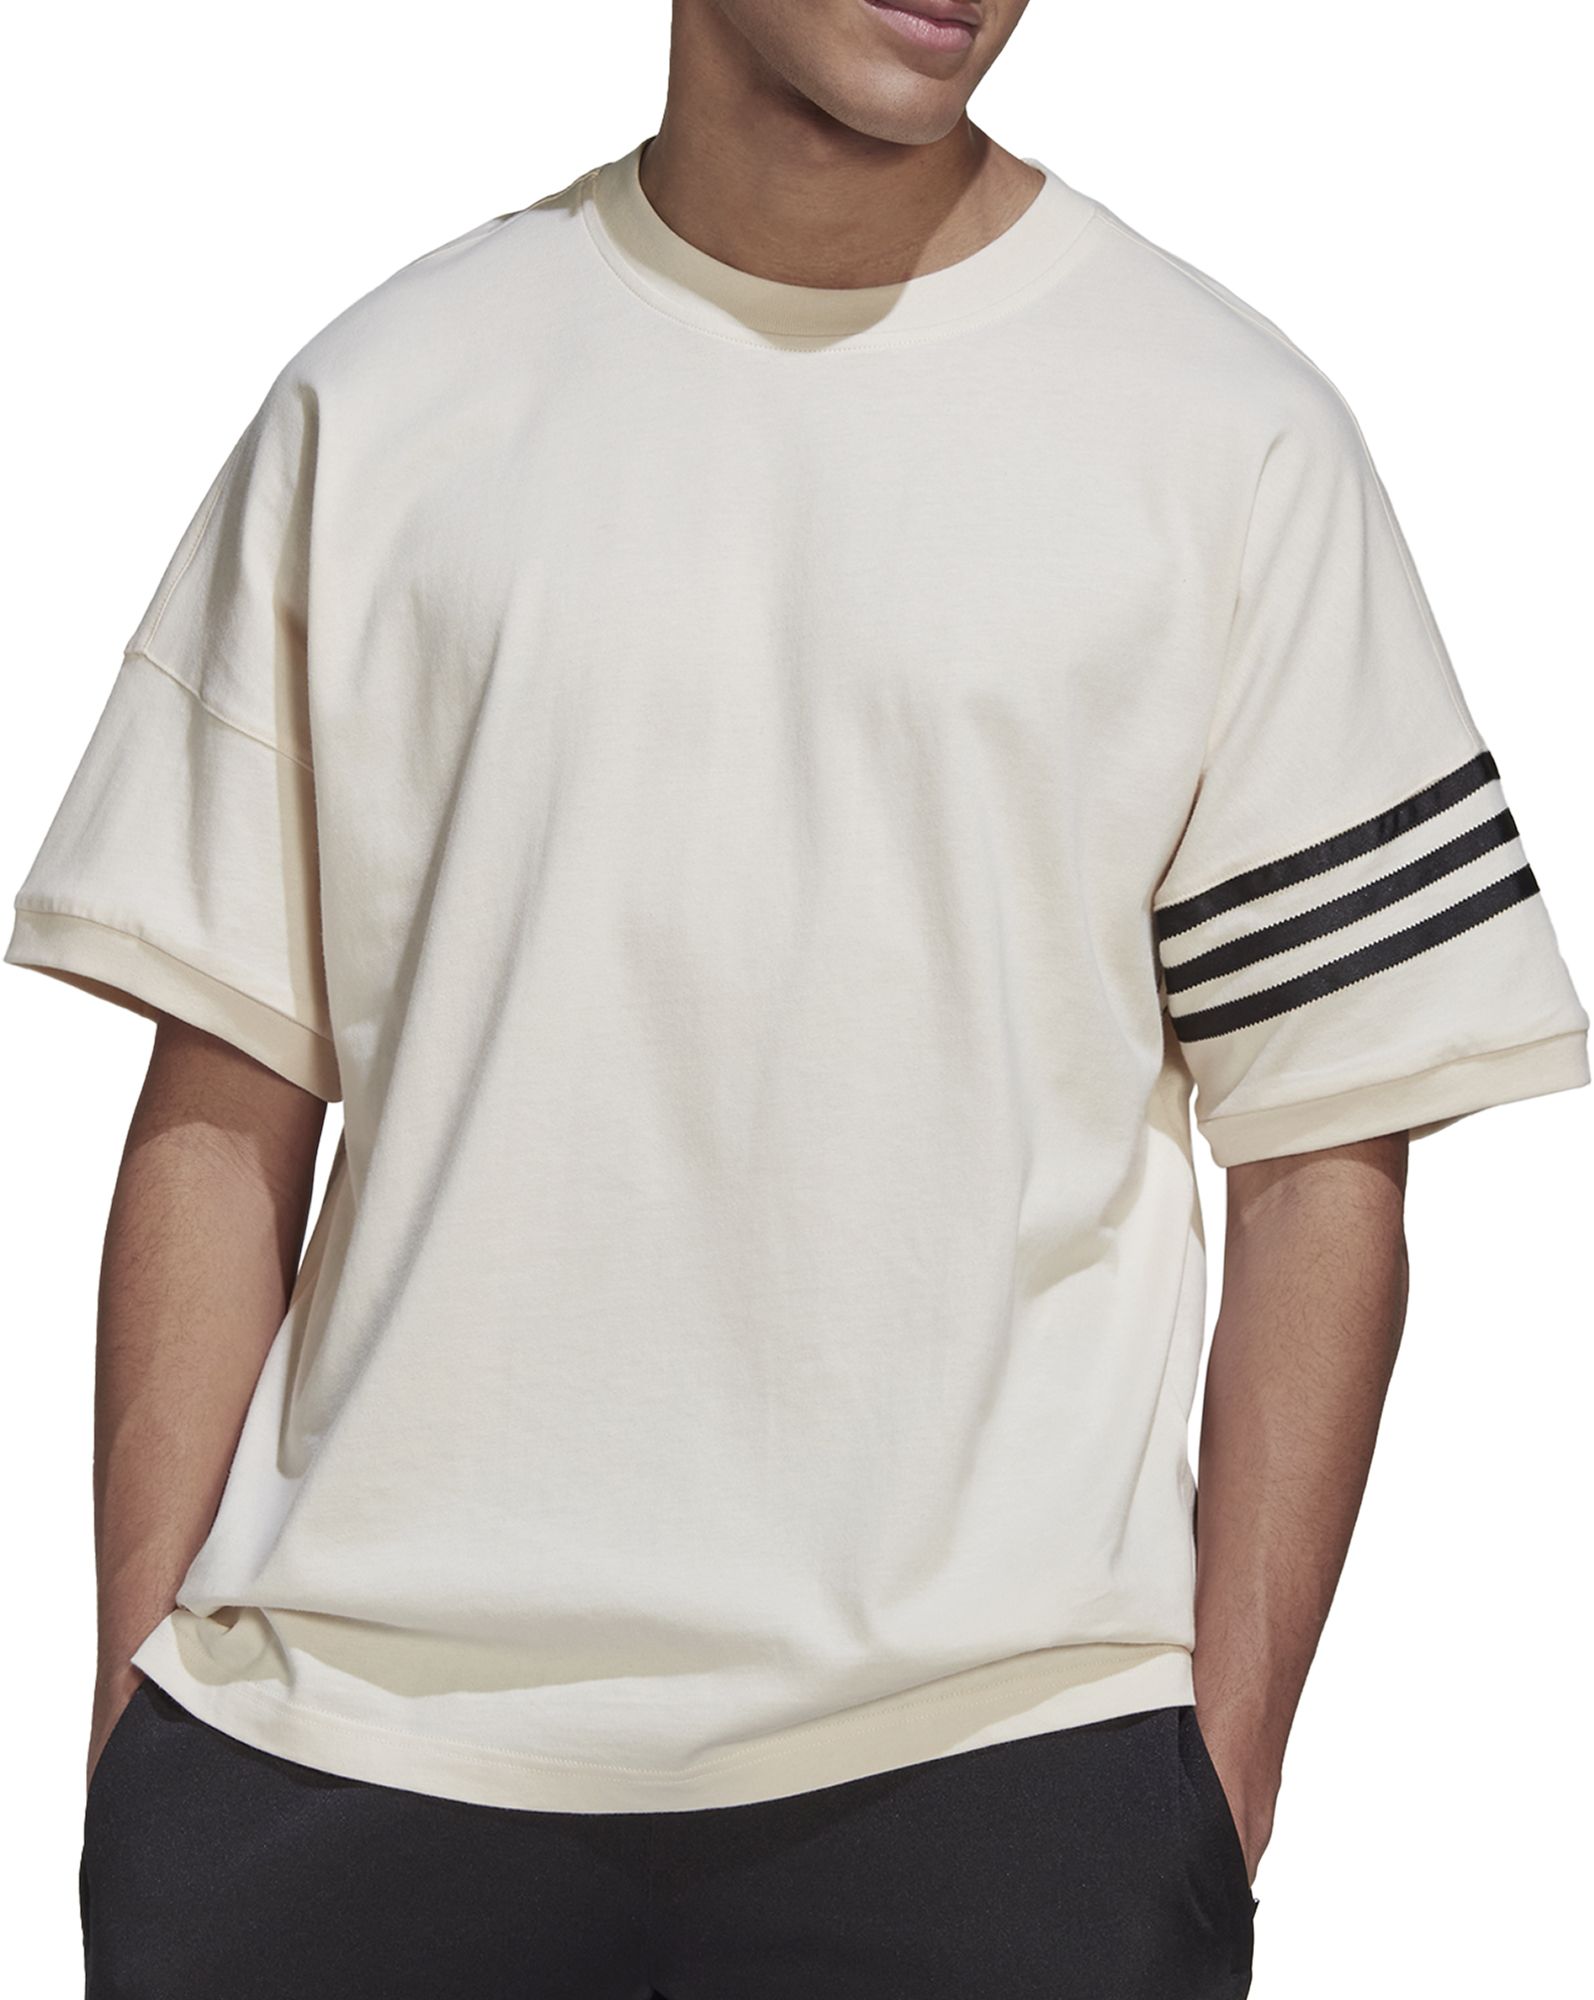 plato O deslealtad adidas Clothing & Apparel | Curbside Pickup Available at DICK'S